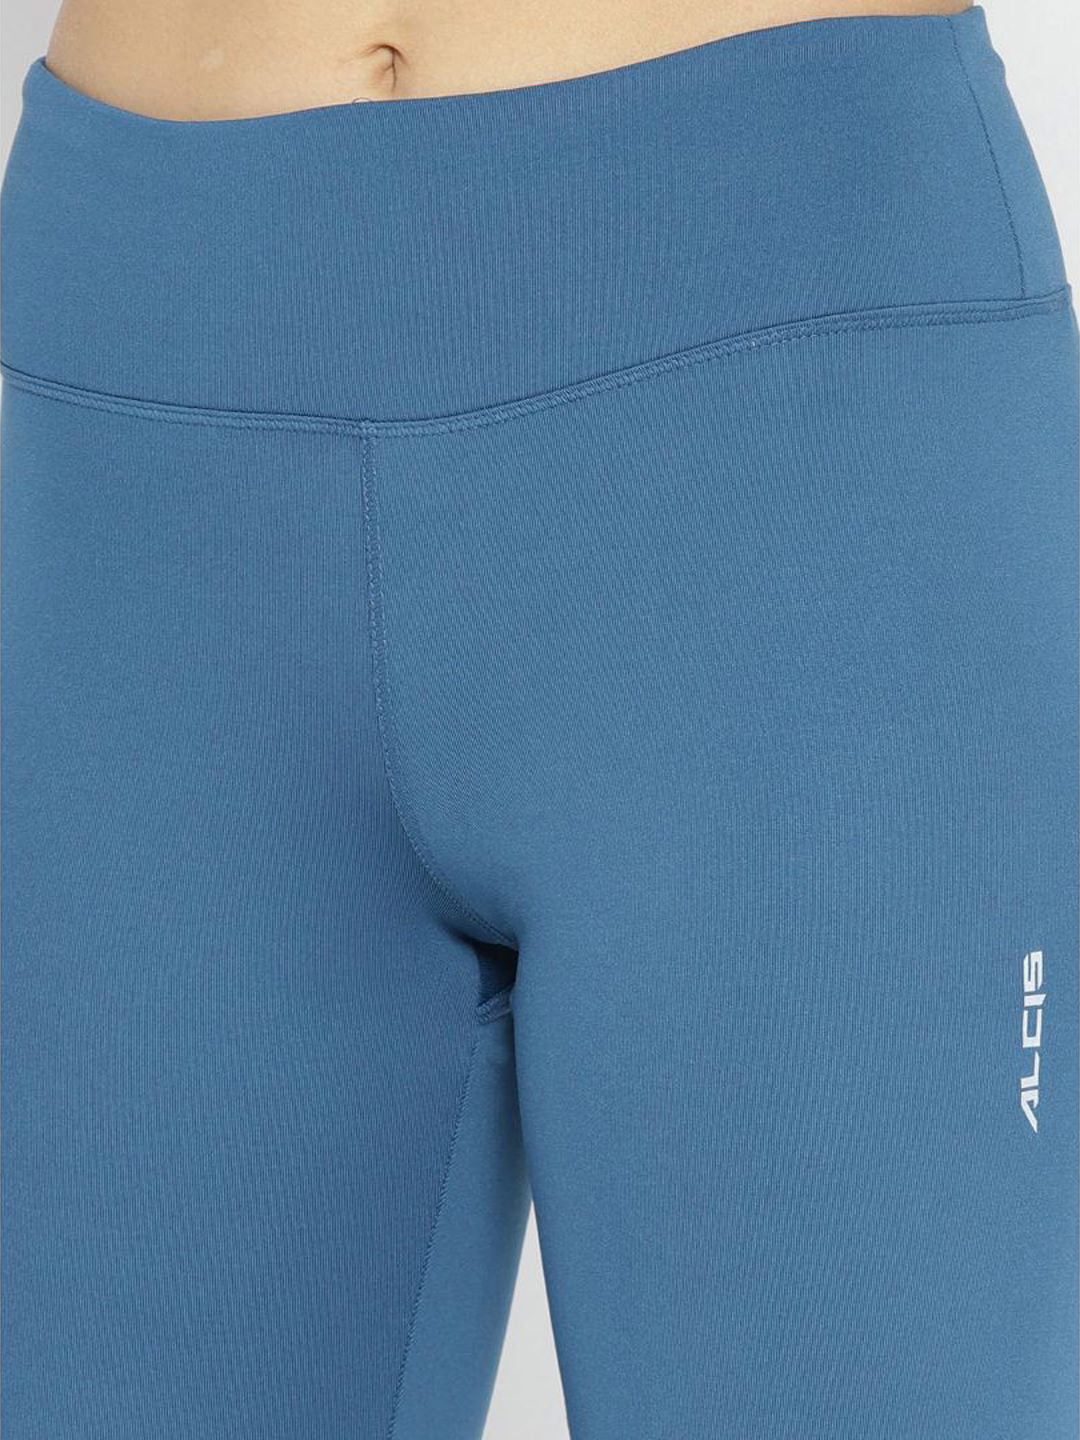 Alcis Women Teal Blue Solid Running Tights with Printed Detail